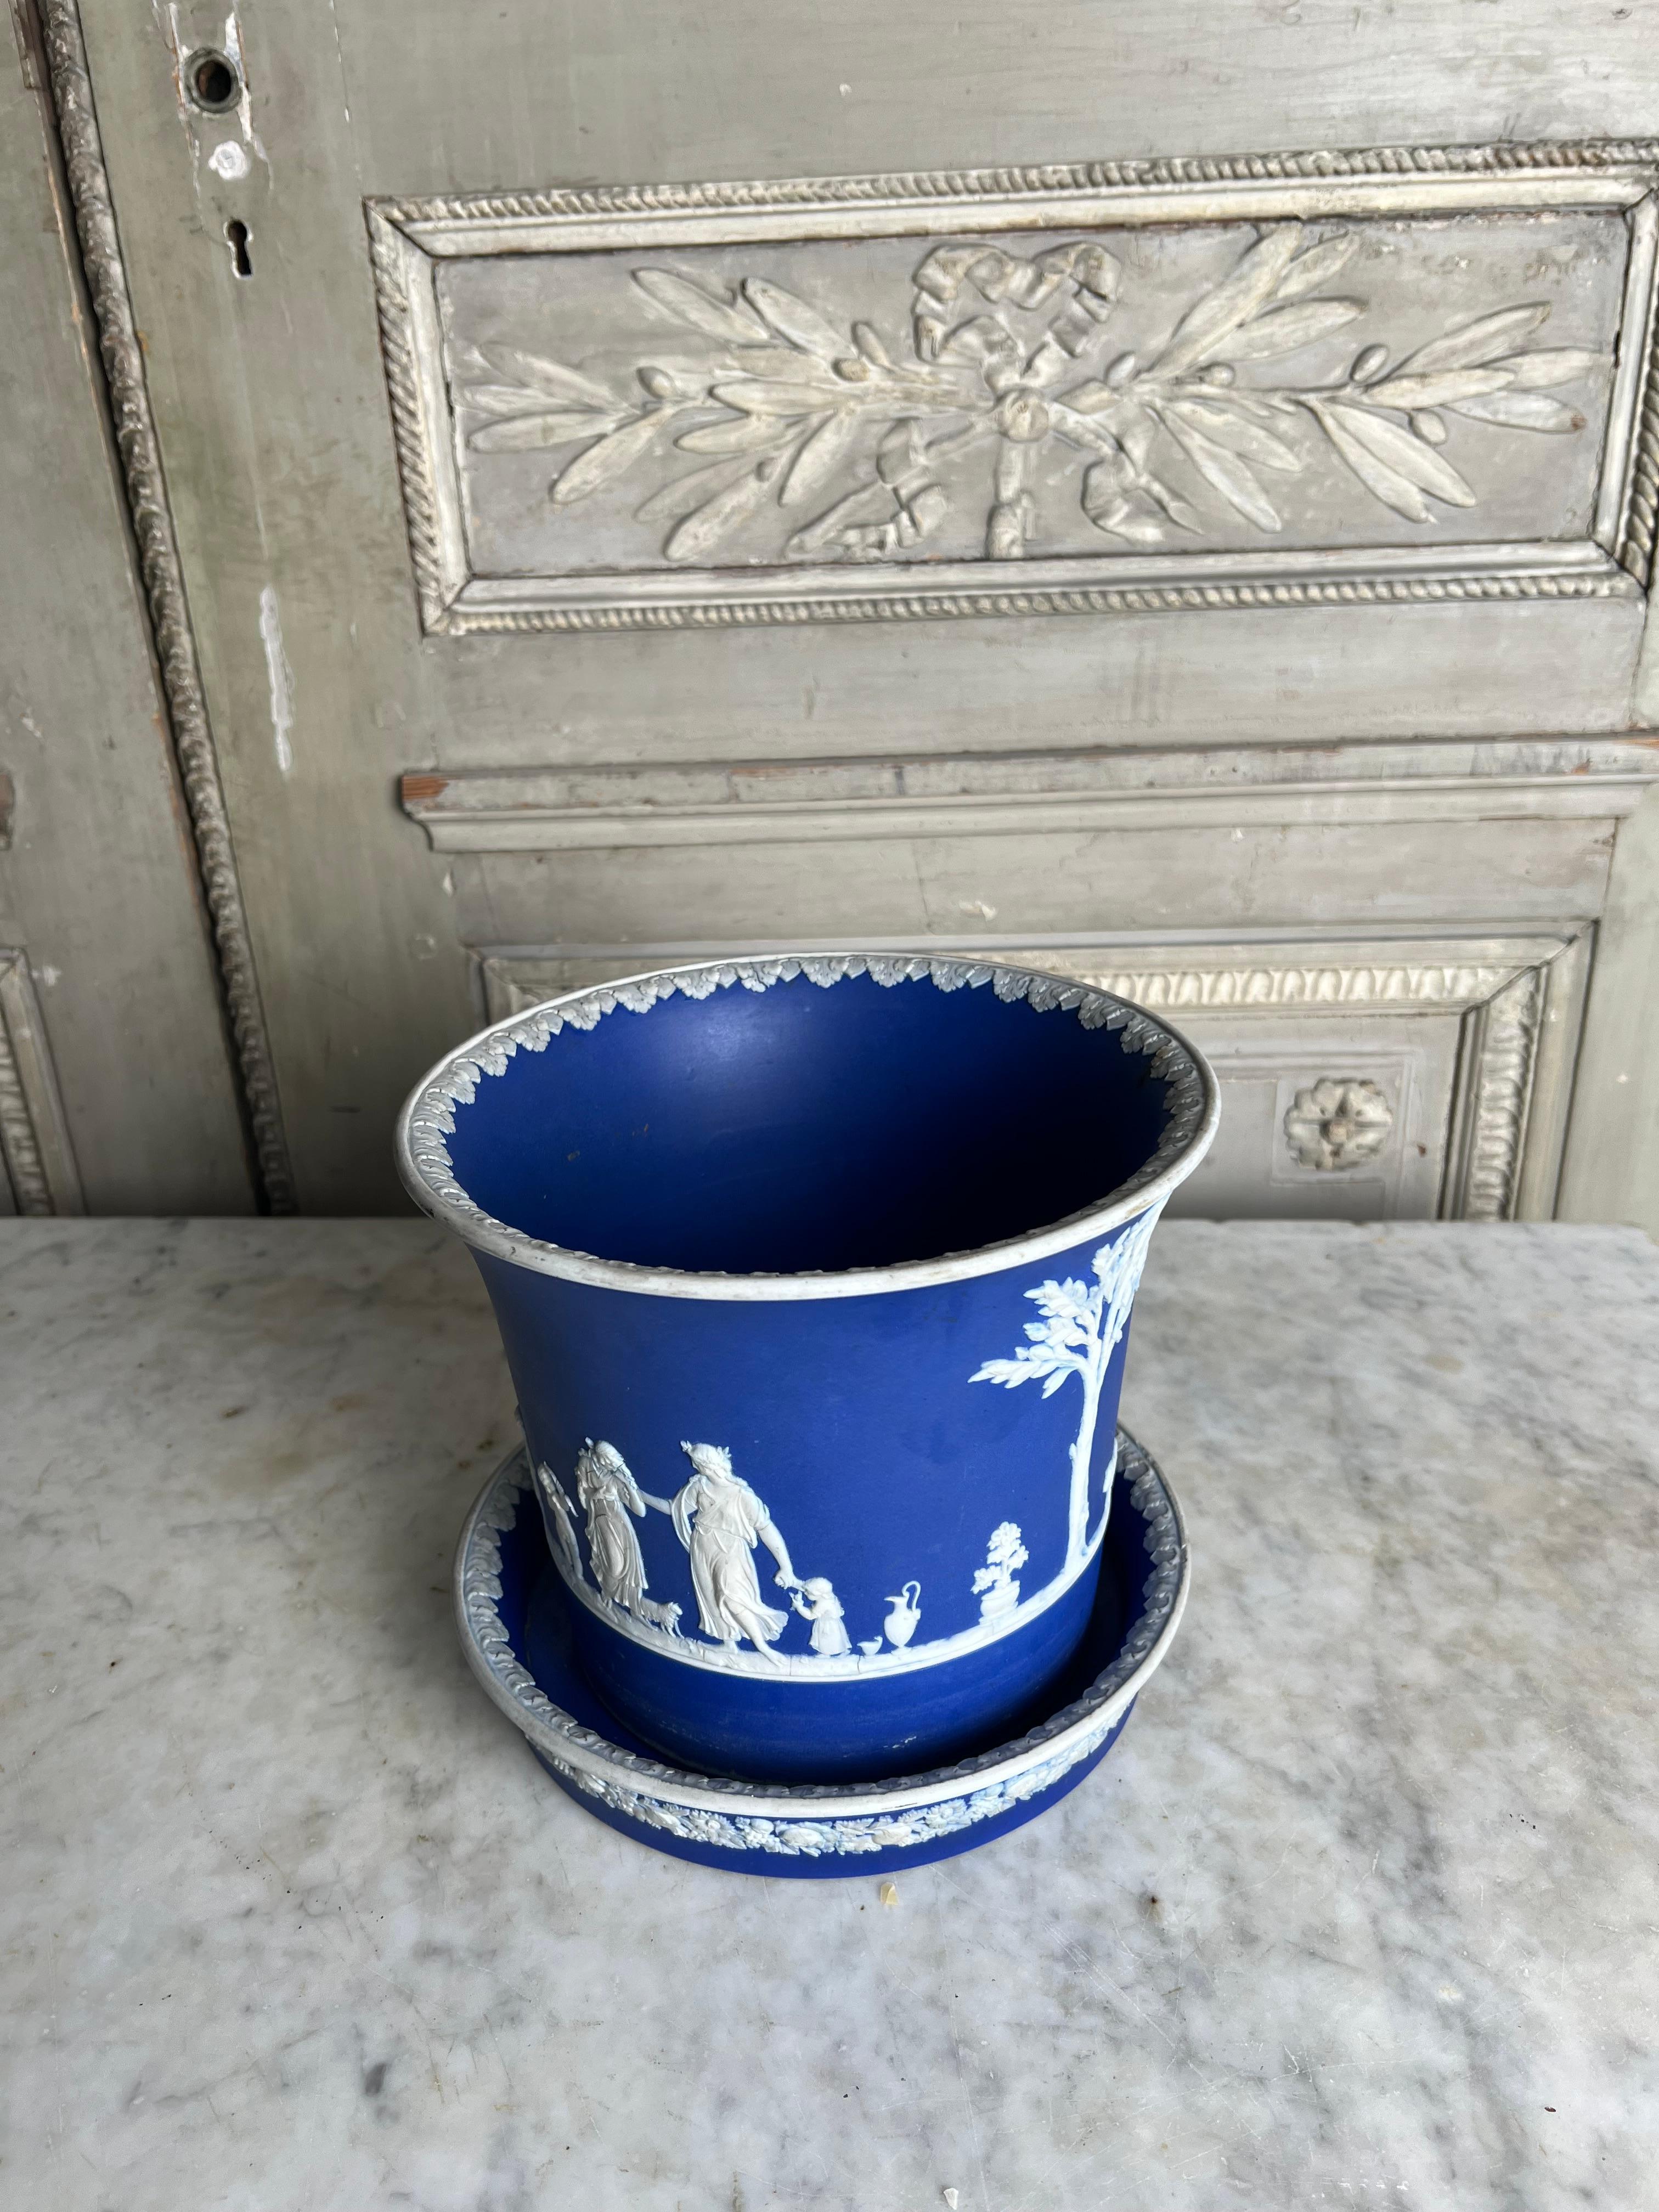 A 19th century English Jasperware planter and underplate, stand in a dark blue and white glaze in the neoclassical style.  This decorative and useful cashepot jardiniere is rare that is still has it's stand or under plate.  